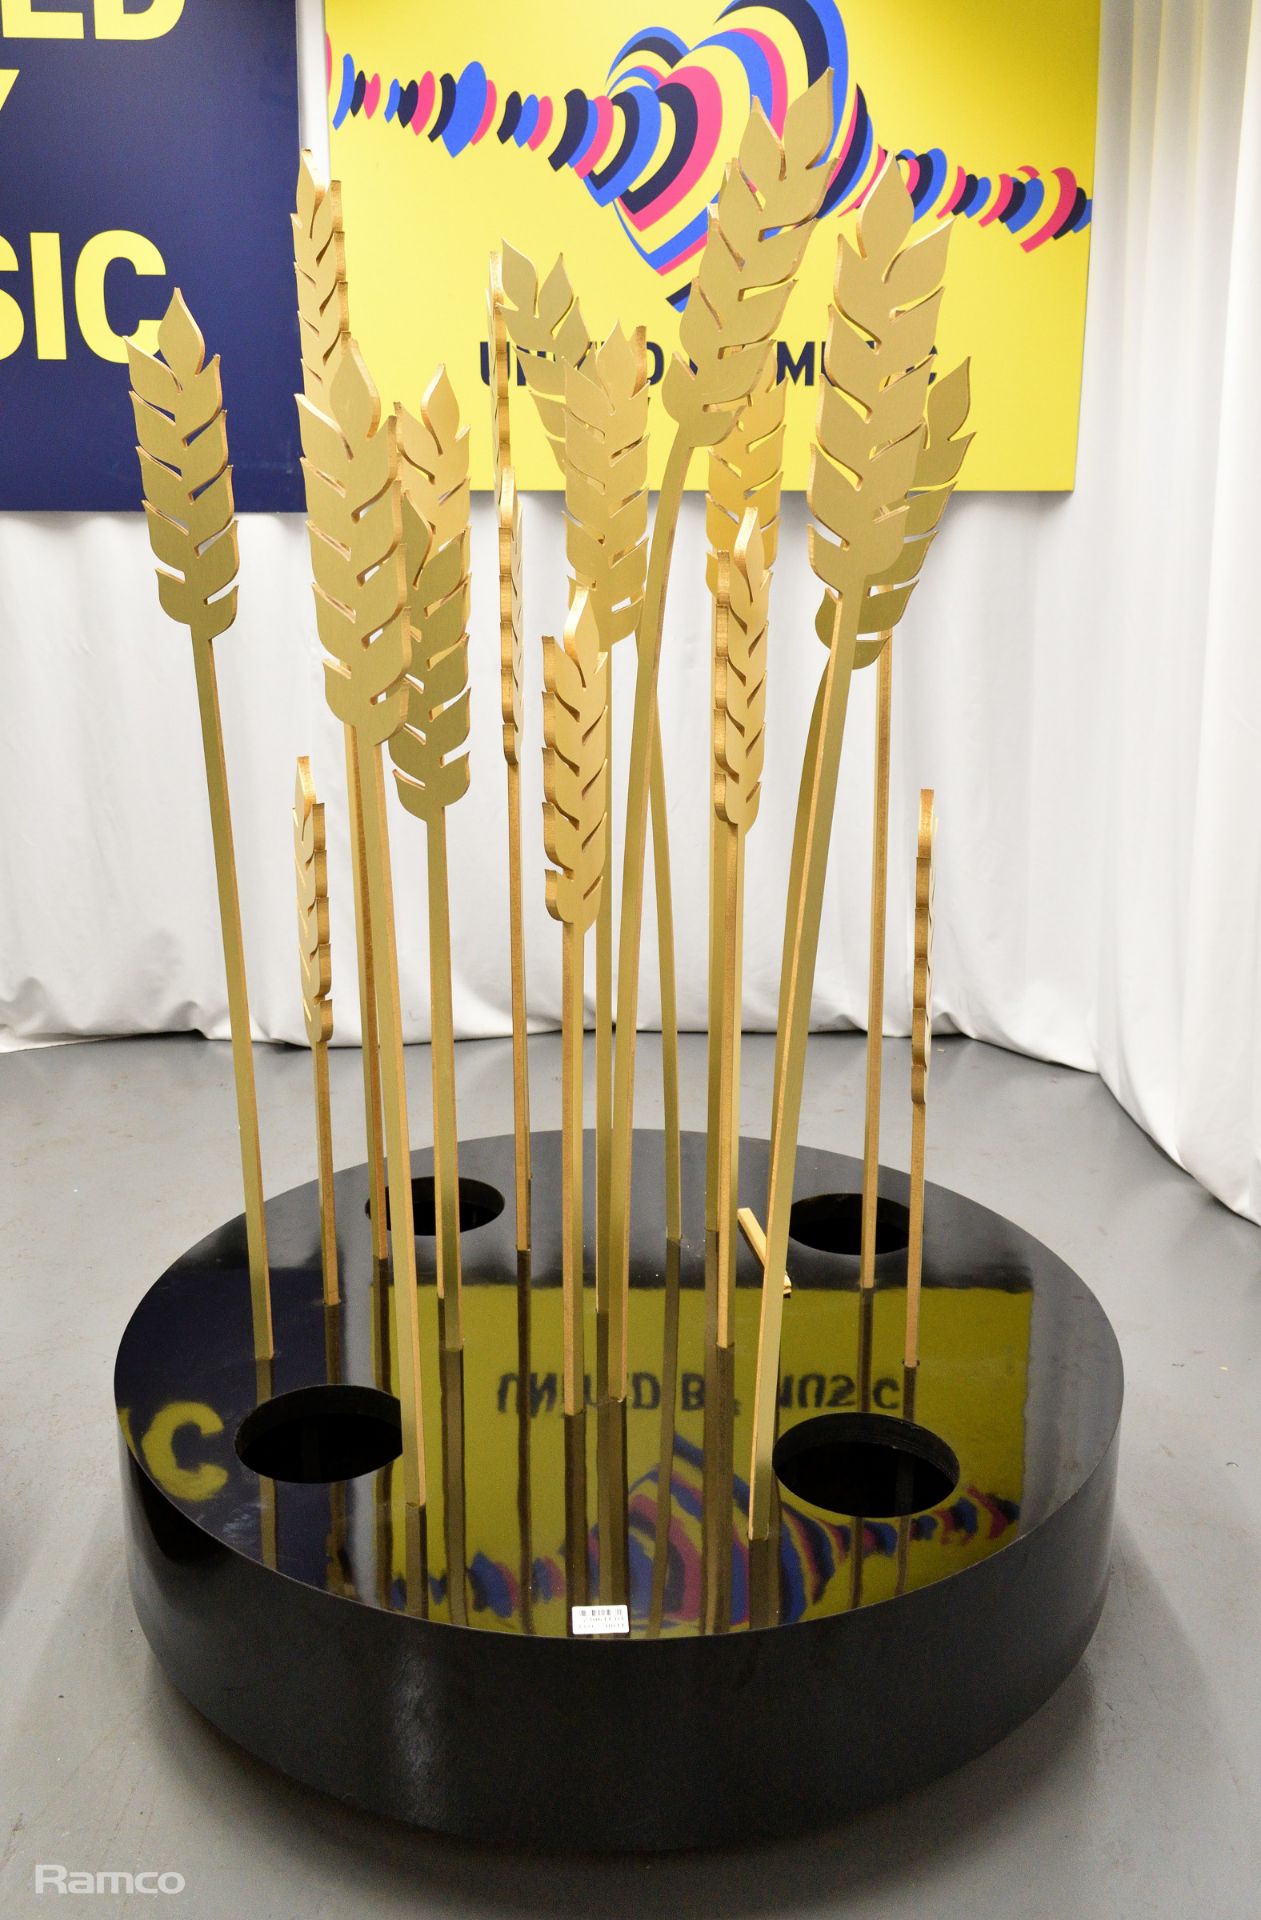 2x Wheat sheaf stage decoration used in the 'United by Music' performance by Mariya Yaremchuck - Image 8 of 12